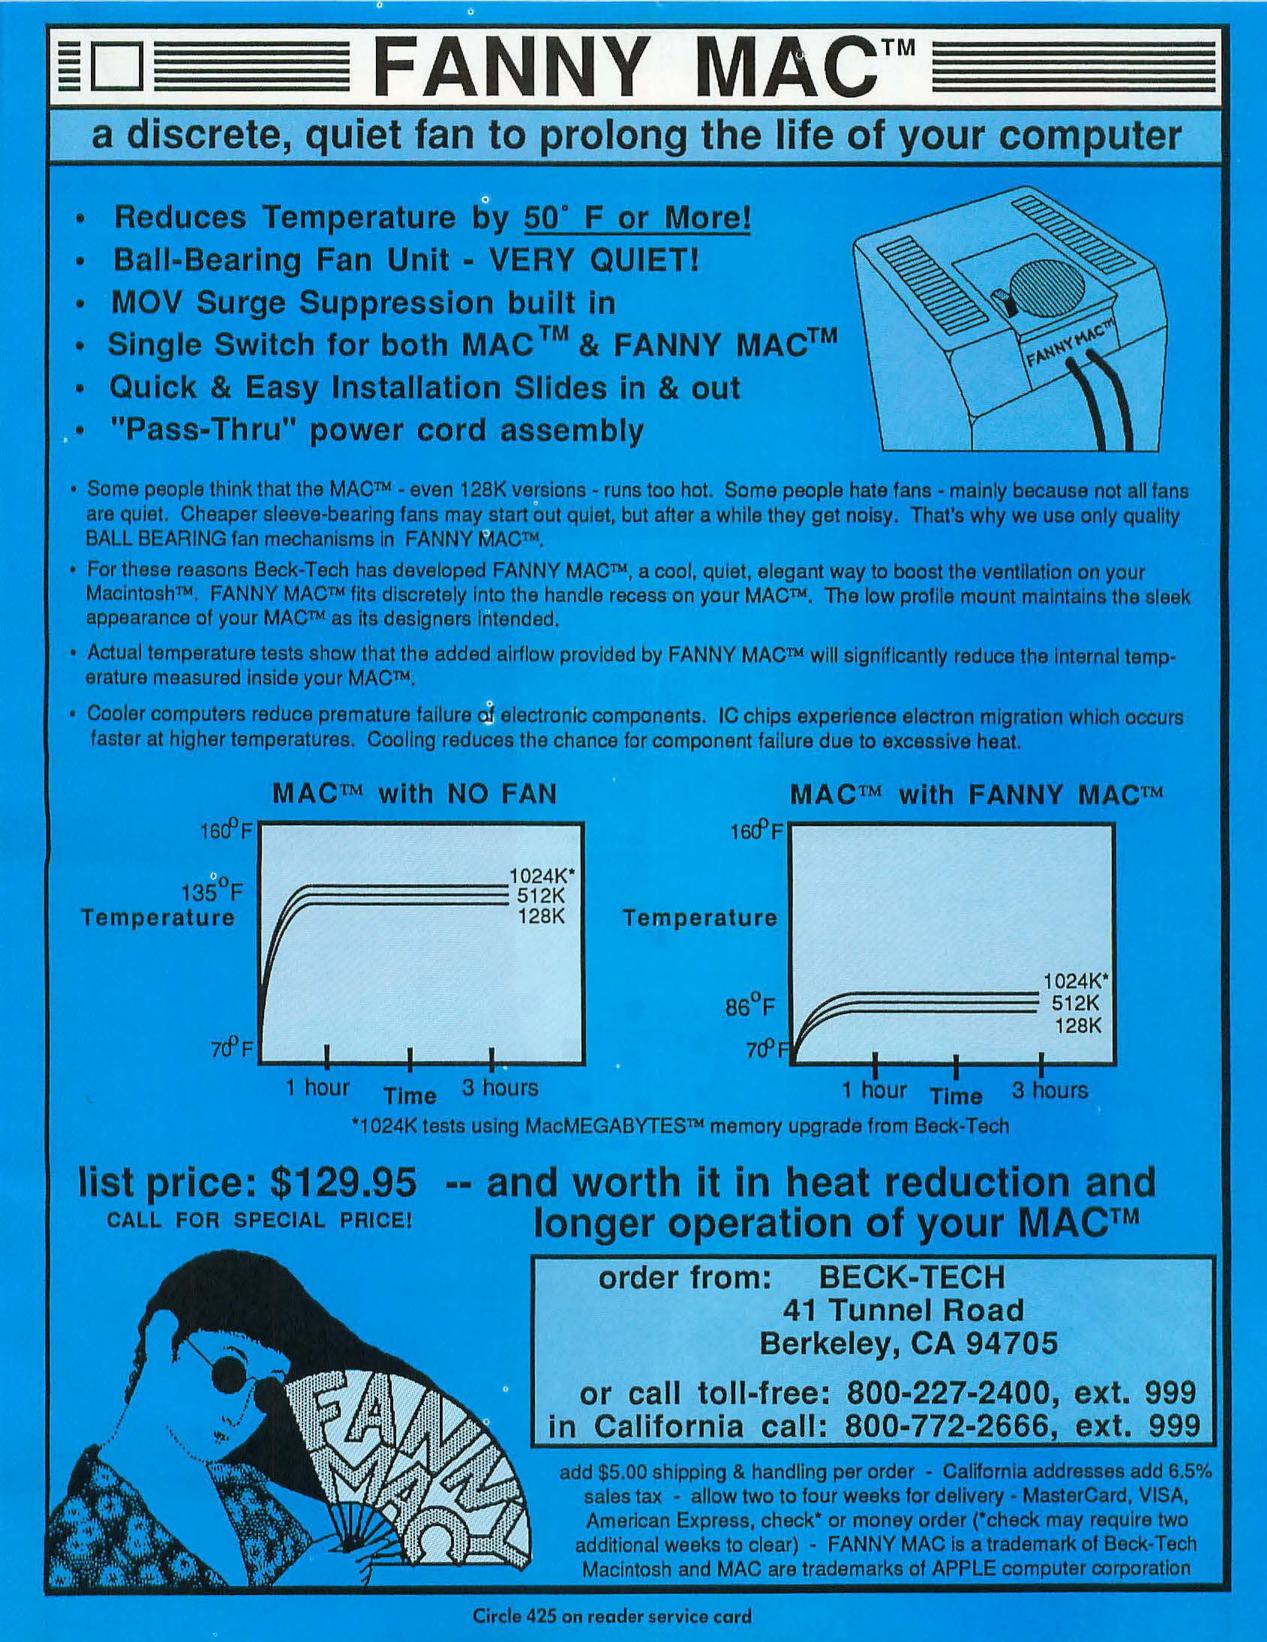 A 1986 magazine advertisement for Fanny Mac, described as &ldquo;a discrete, quite fan to prolong the life of your computer.&rdquo;